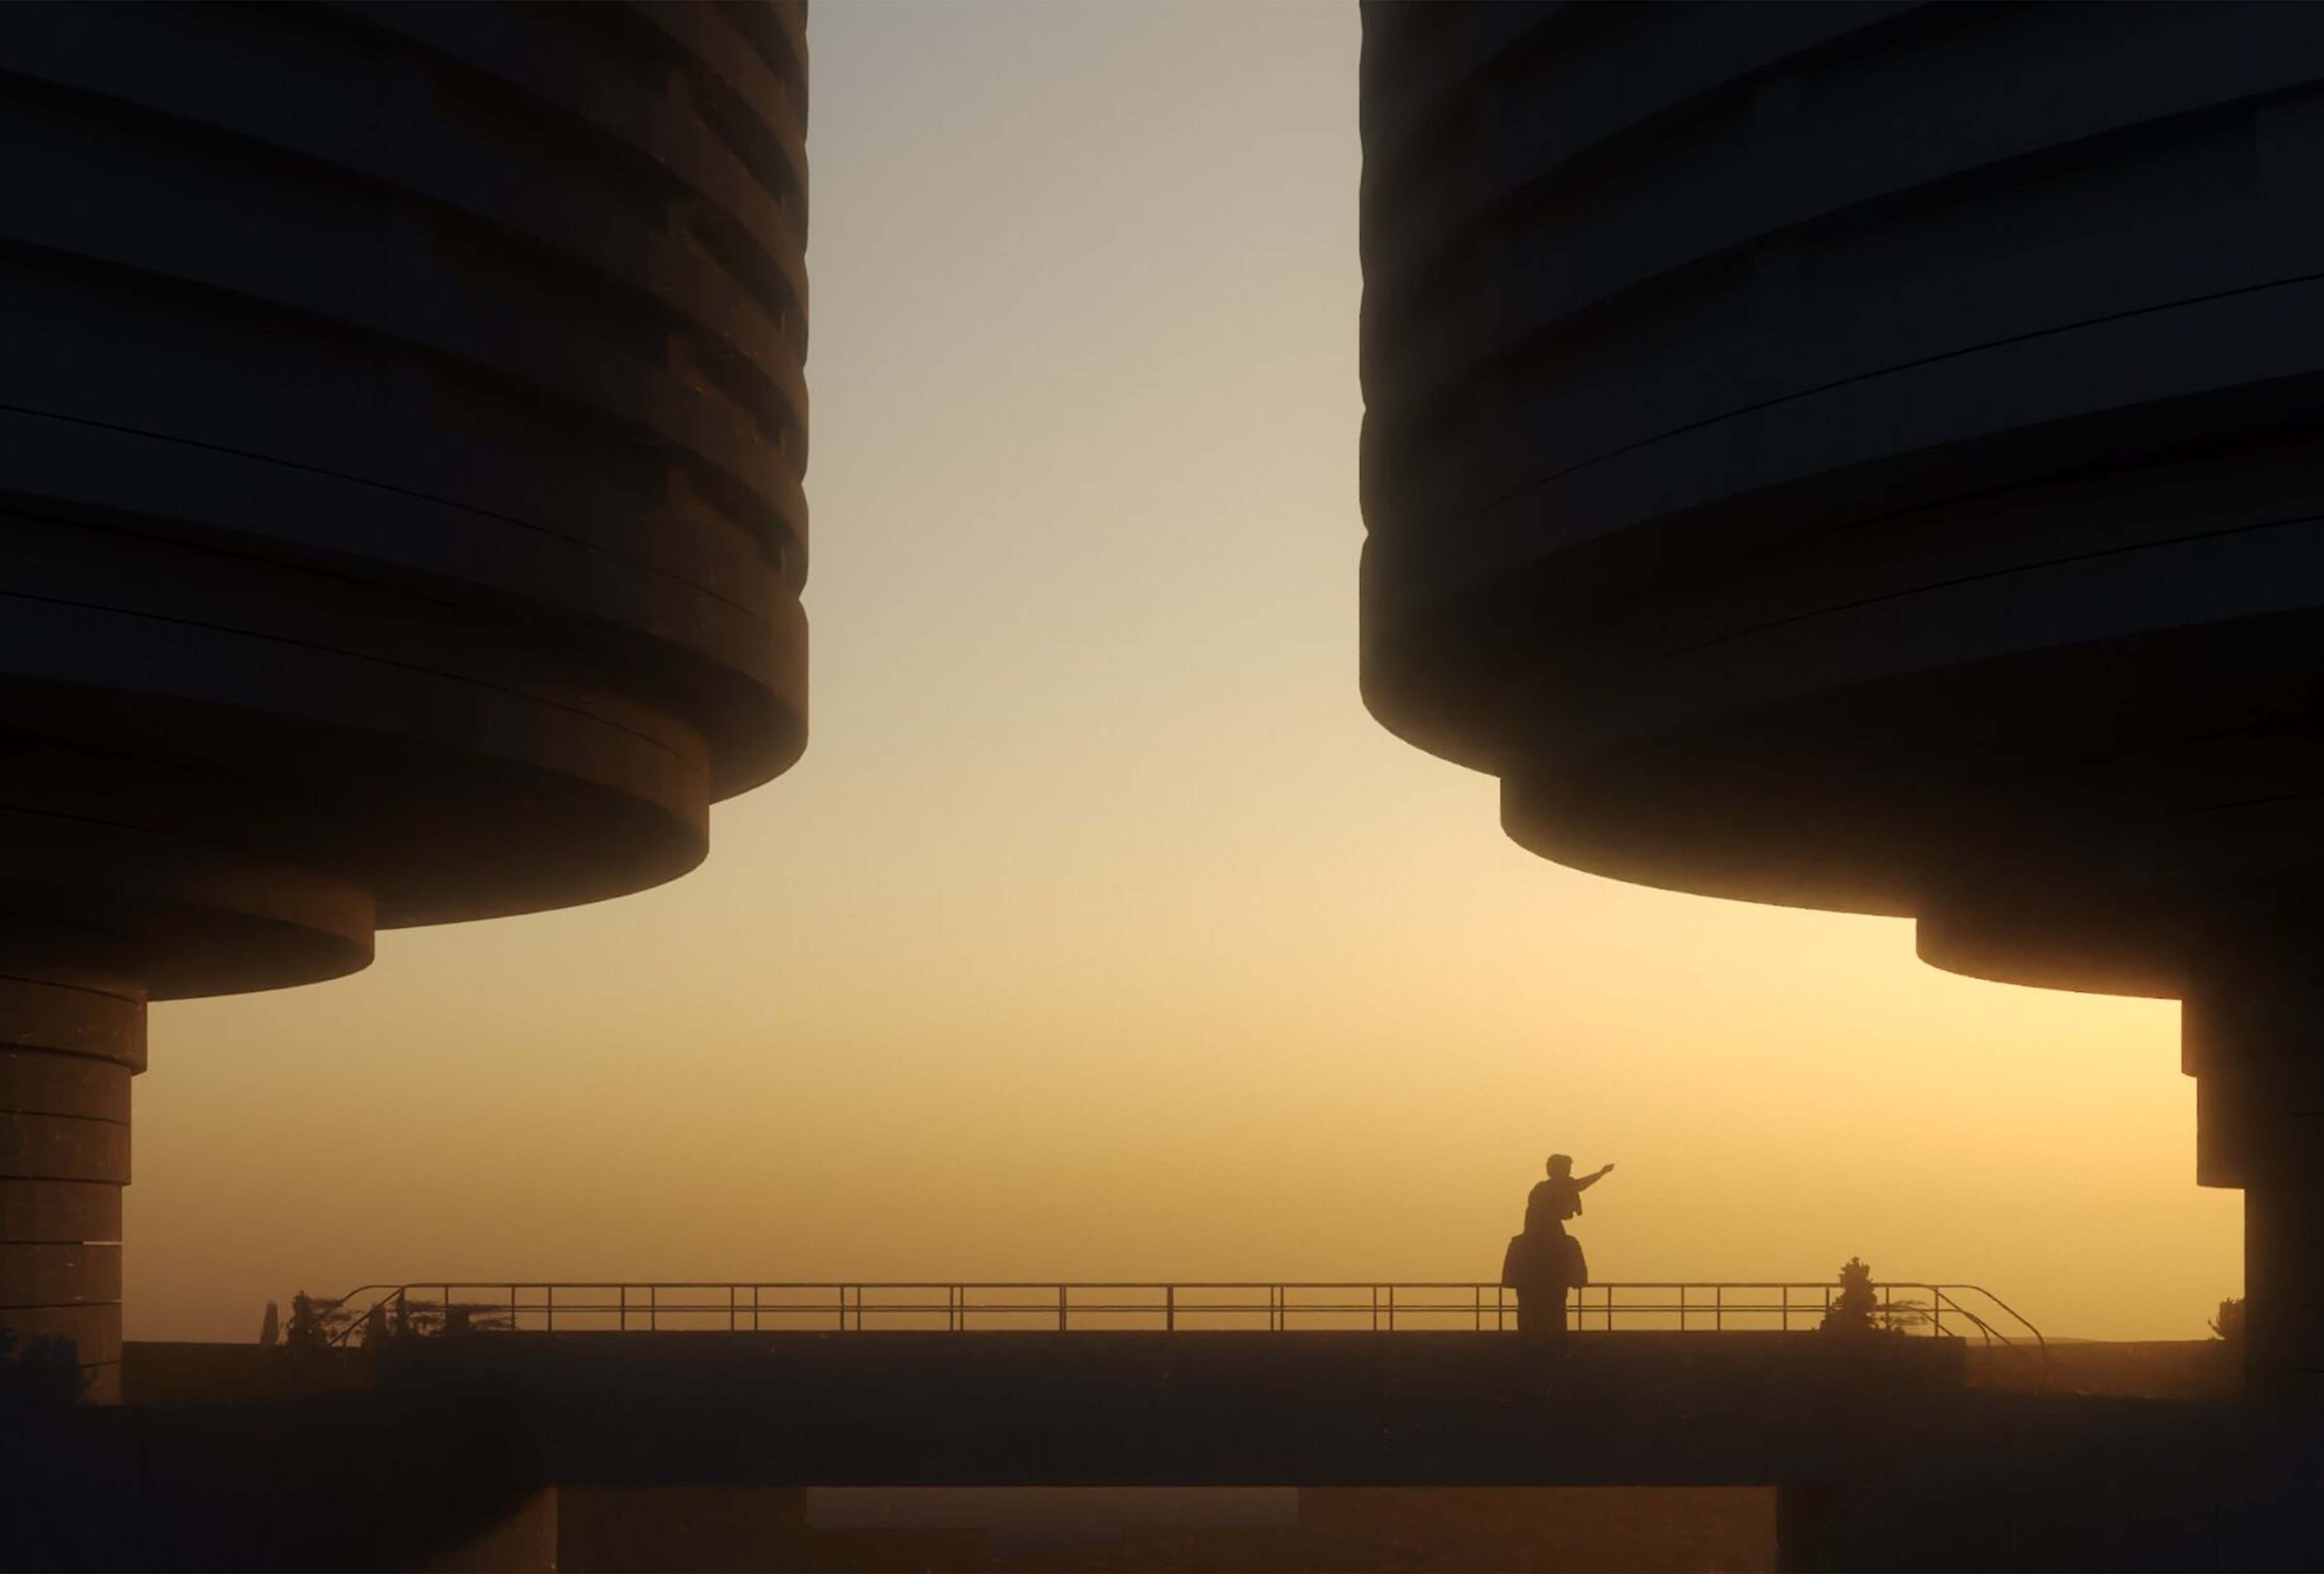 Render of two concrete silos at Zeeburgereiland at sunset. A child sit on their parent's shoulder at the bottom right of one silo. Image courtesy of Elephant. 